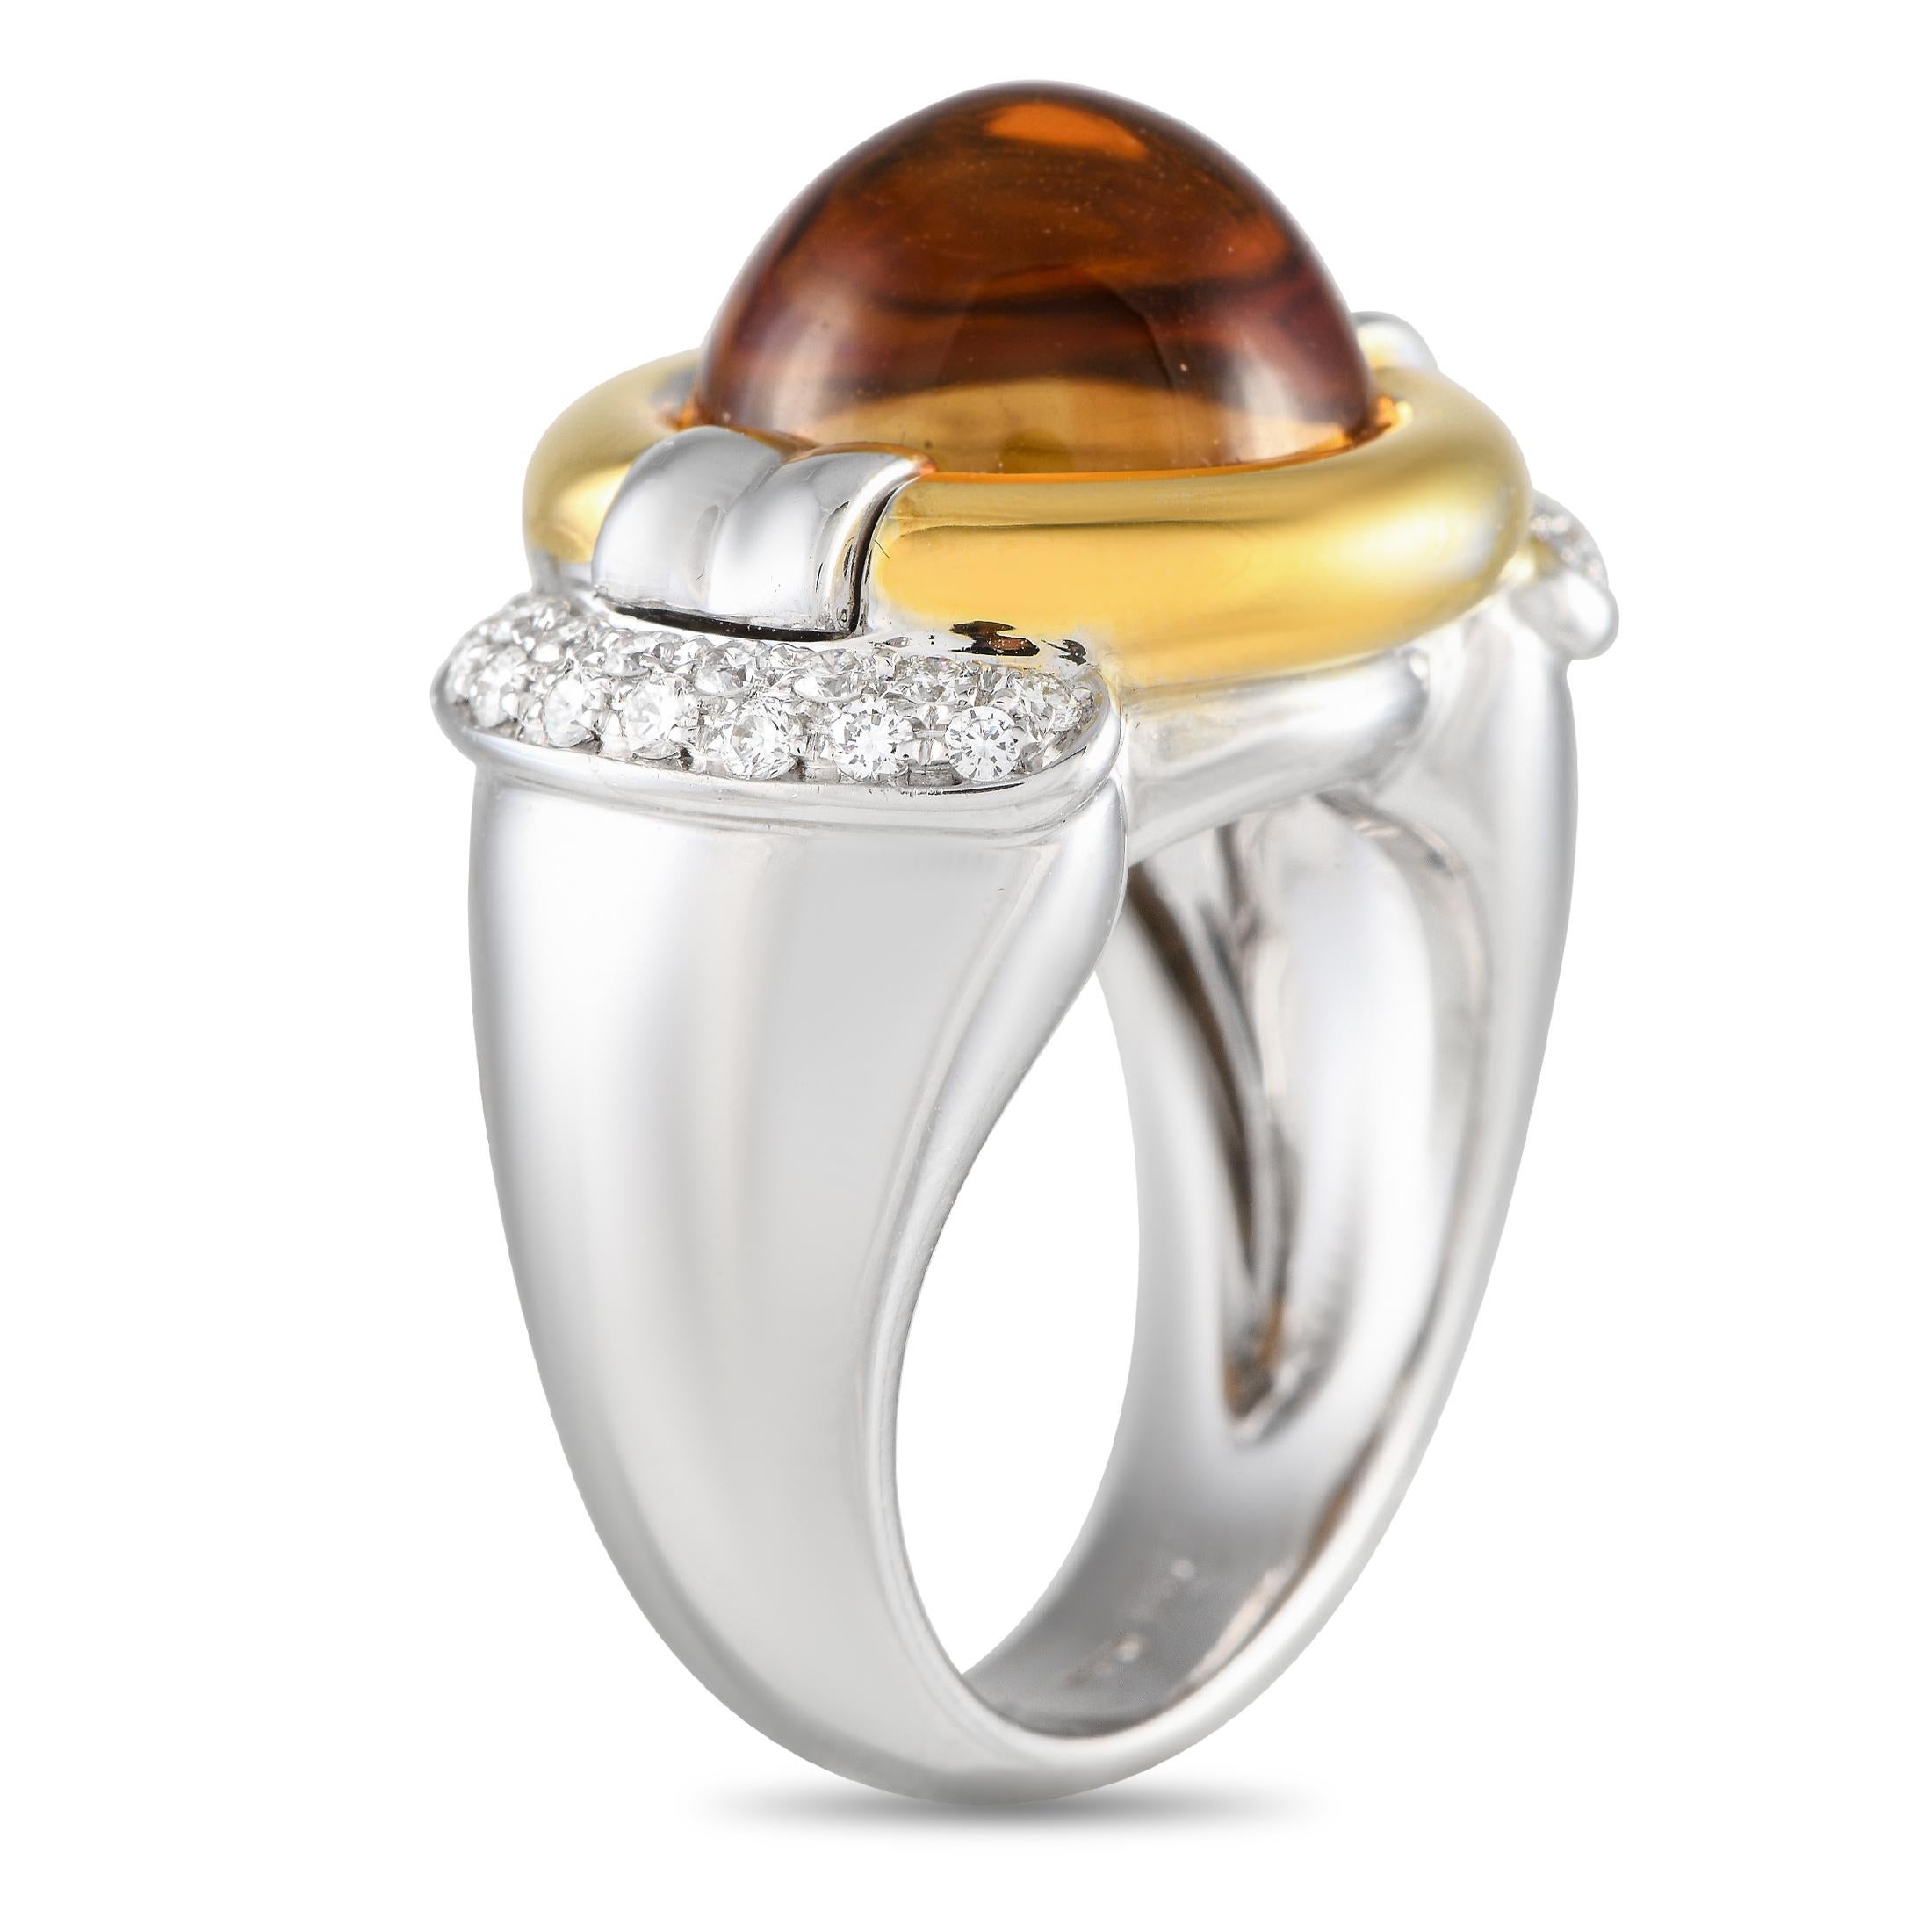 If big and bold is your style, then this statement ring is for you. This LB Exclusive piece features a domed shank that measures 6mm thick, with a top height of 12mm. It has an eye-catching 5.25-carat citrine center stone held by a yellow gold bezel